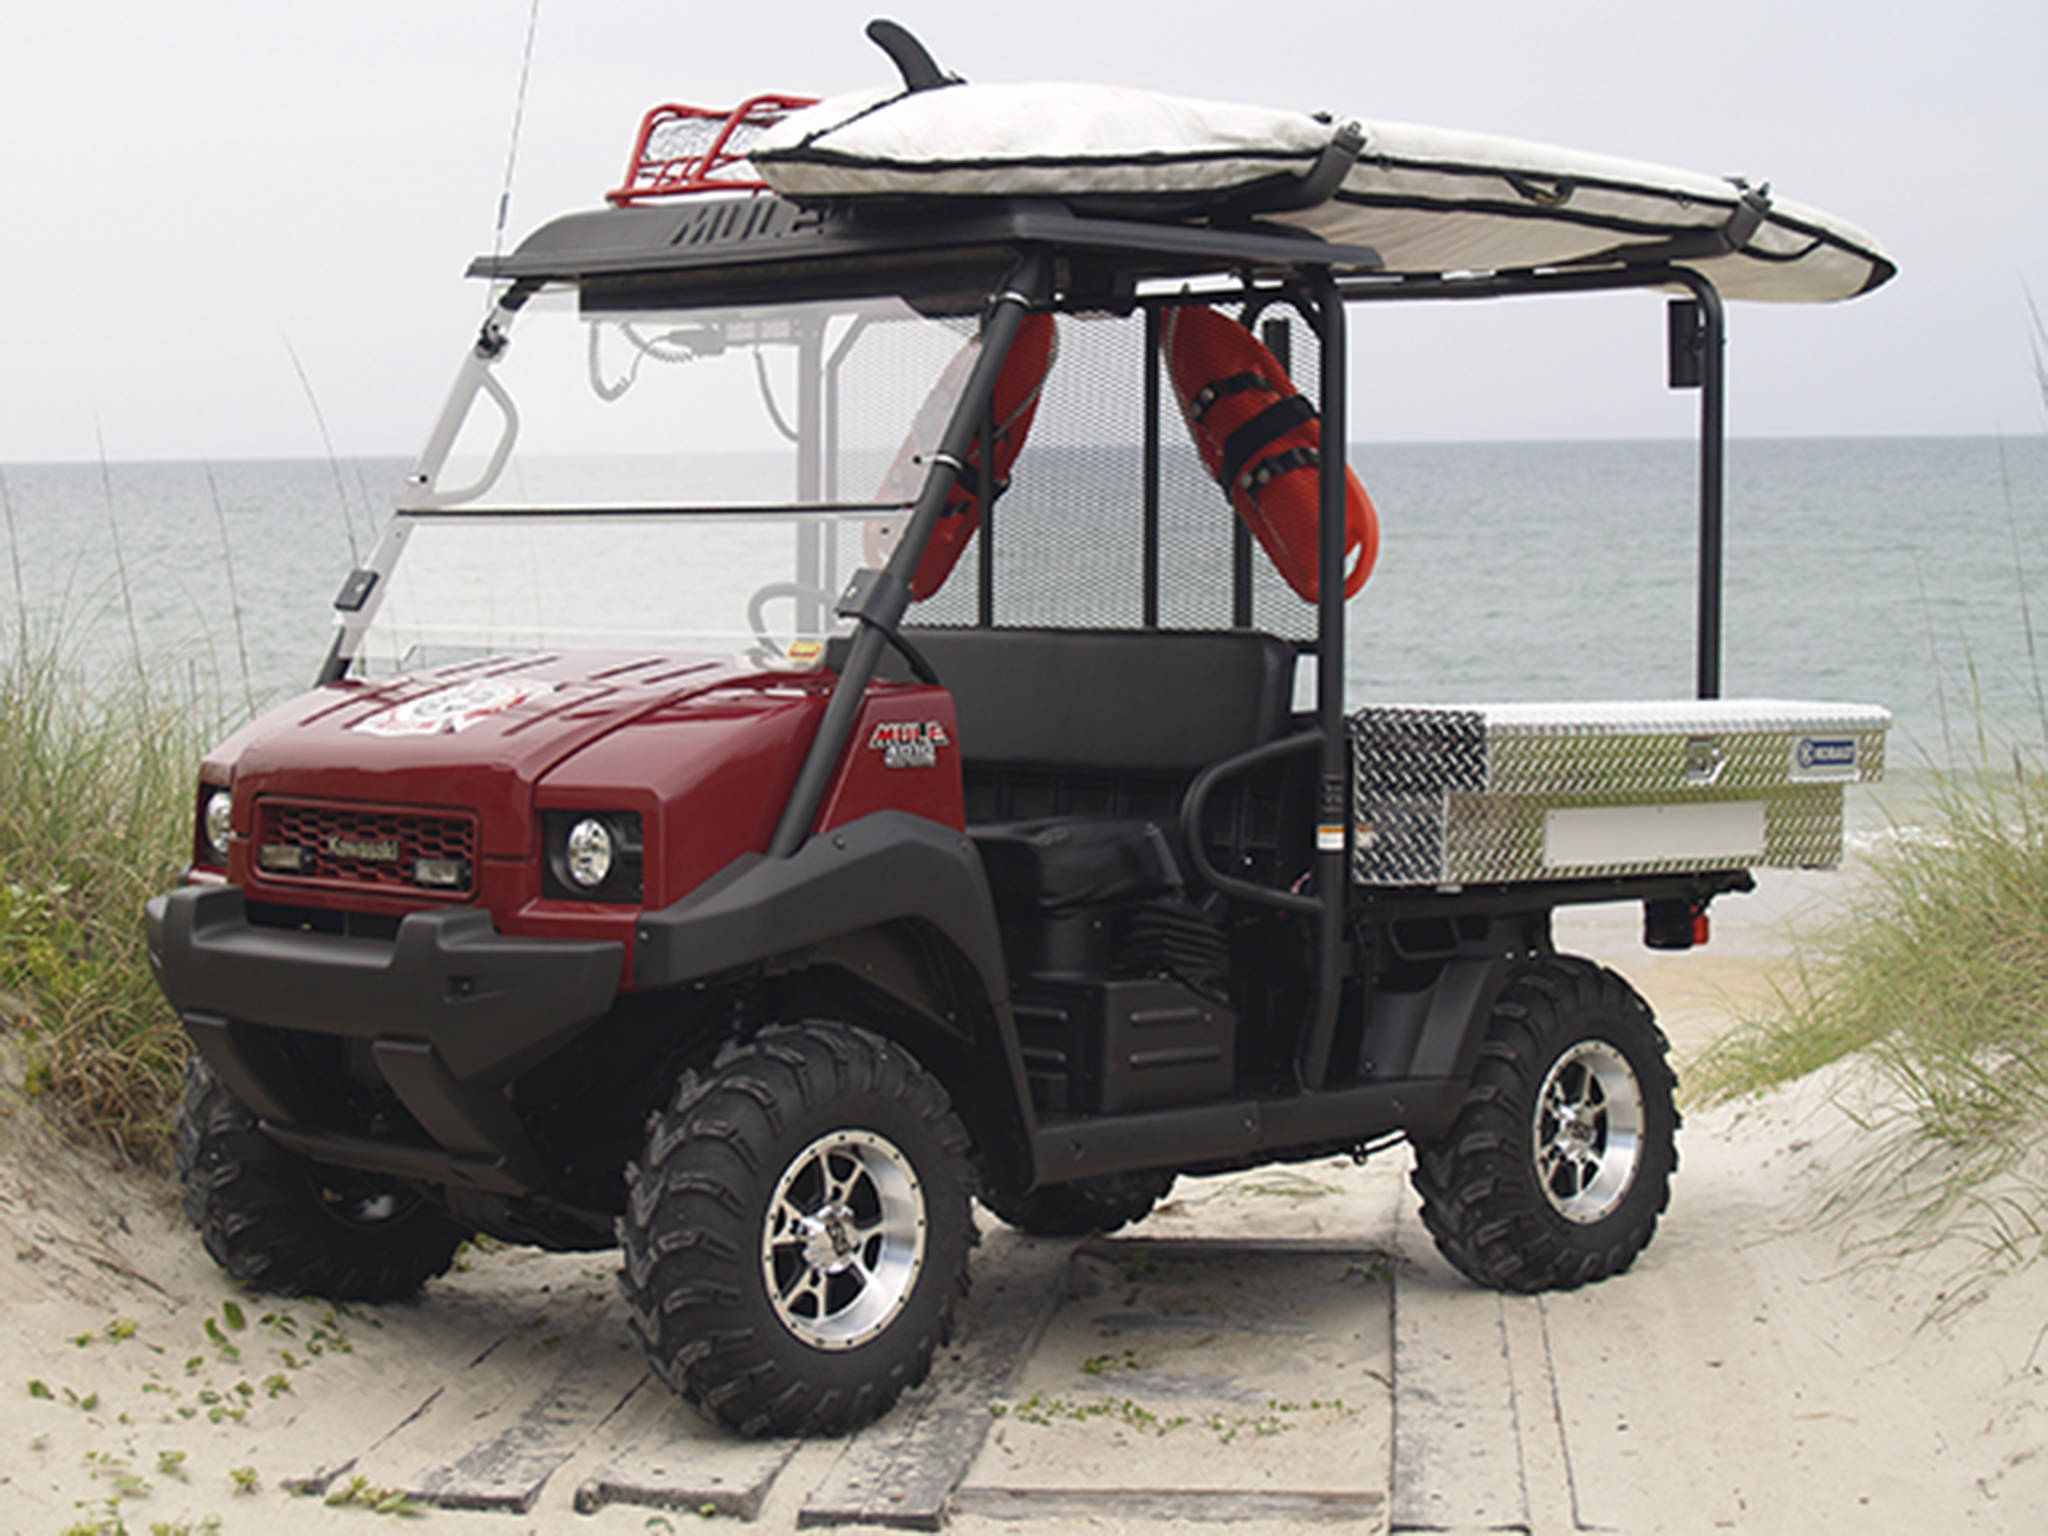 City amends policy on all-terrain vehicles